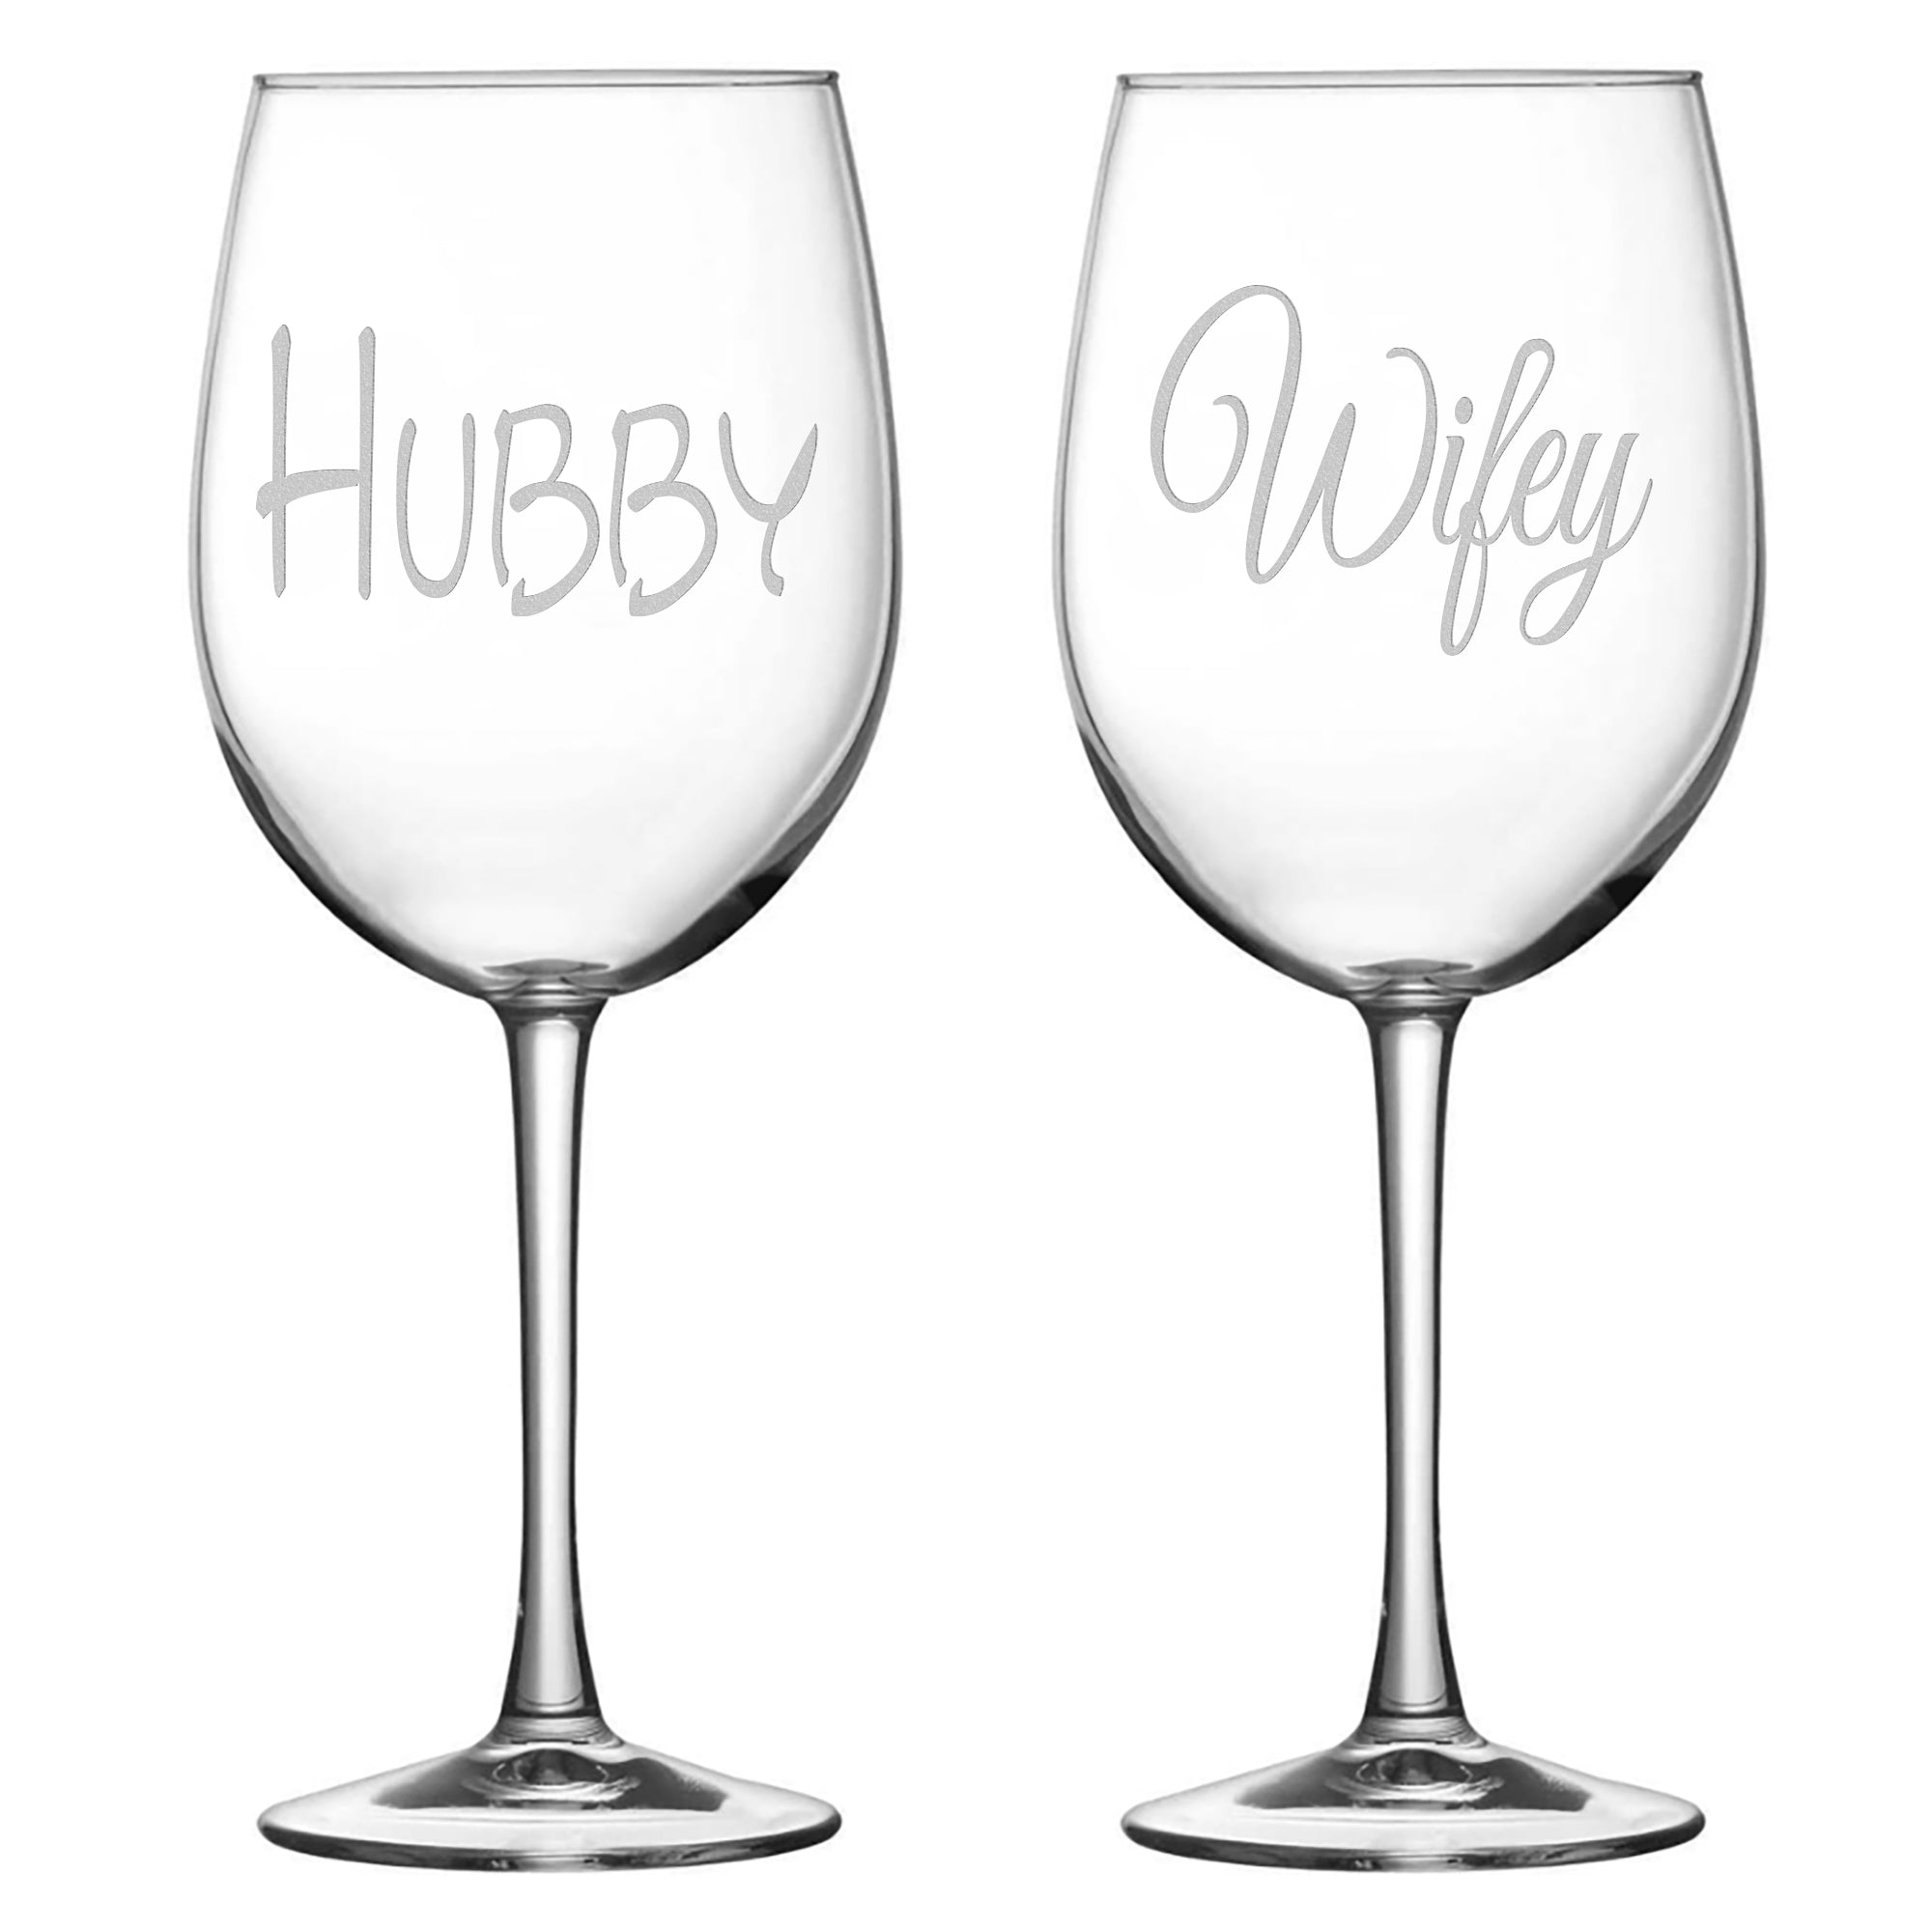 Integrity Bottles Hubby Wifey, (Set of 2) Stemmed Wine Glasses, Handmade, Handblown, Hand Etched Gifts, Sand Carved, 16oz, Laser Etched or Hand Etched